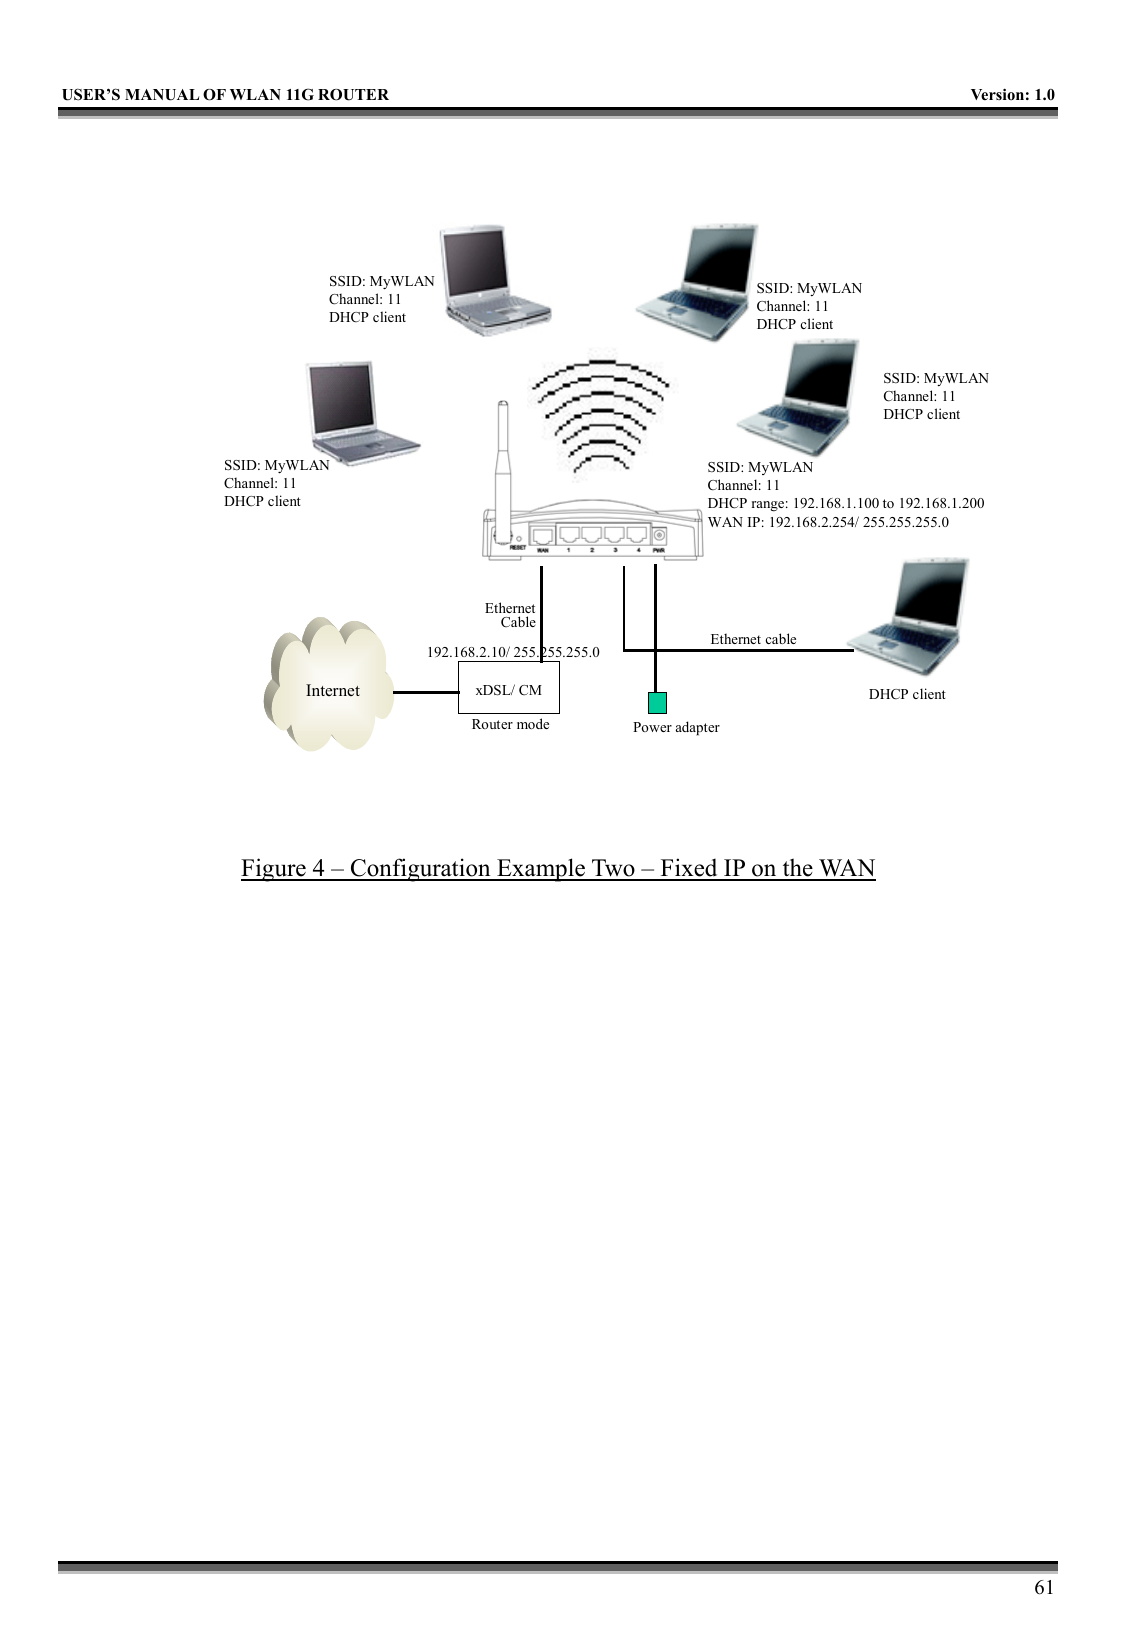   USER’S MANUAL OF WLAN 11G ROUTER    Version: 1.0     61 Internet xDSL/ CMPower adapterEthernetCableEthernet cableSSID: MyWLANChannel: 11 DHCP clientSSID: MyWLANChannel: 11 DHCP clientSSID: MyWLANChannel: 11 DHCP clientSSID: MyWLANChannel: 11 DHCP clientDHCP clientRouter modeSSID: MyWLANChannel: 11DHCP range: 192.168.1.100 to 192.168.1.200WAN IP: 192.168.2.254/ 255.255.255.0192.168.2.10/ 255.255.255.0 Figure 4 – Configuration Example Two – Fixed IP on the WAN  